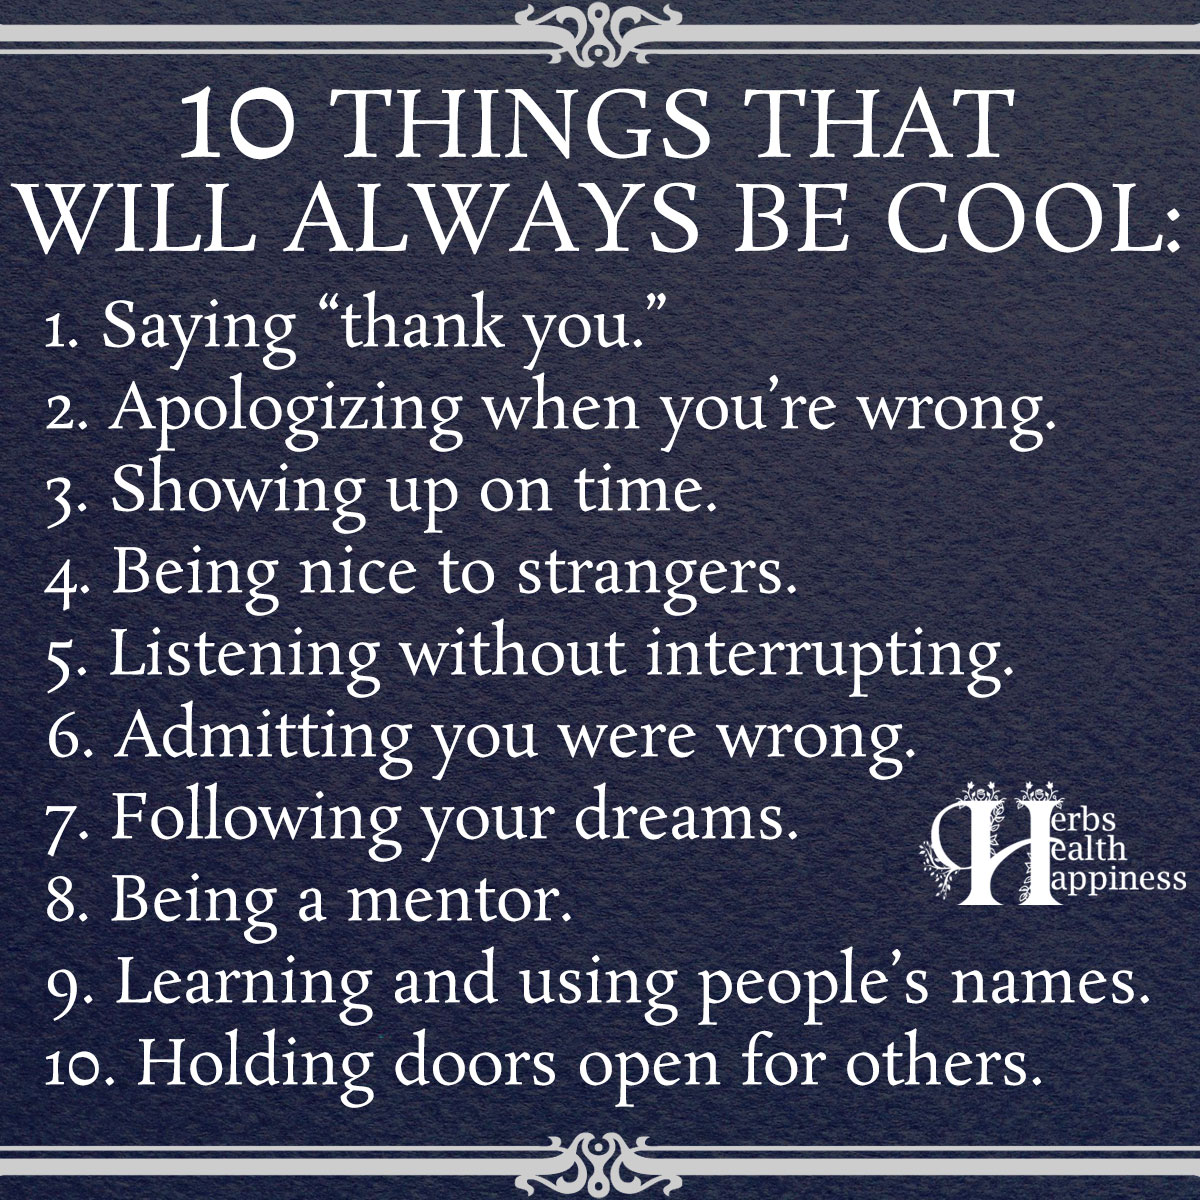 10 Things That Will Always Be Cool